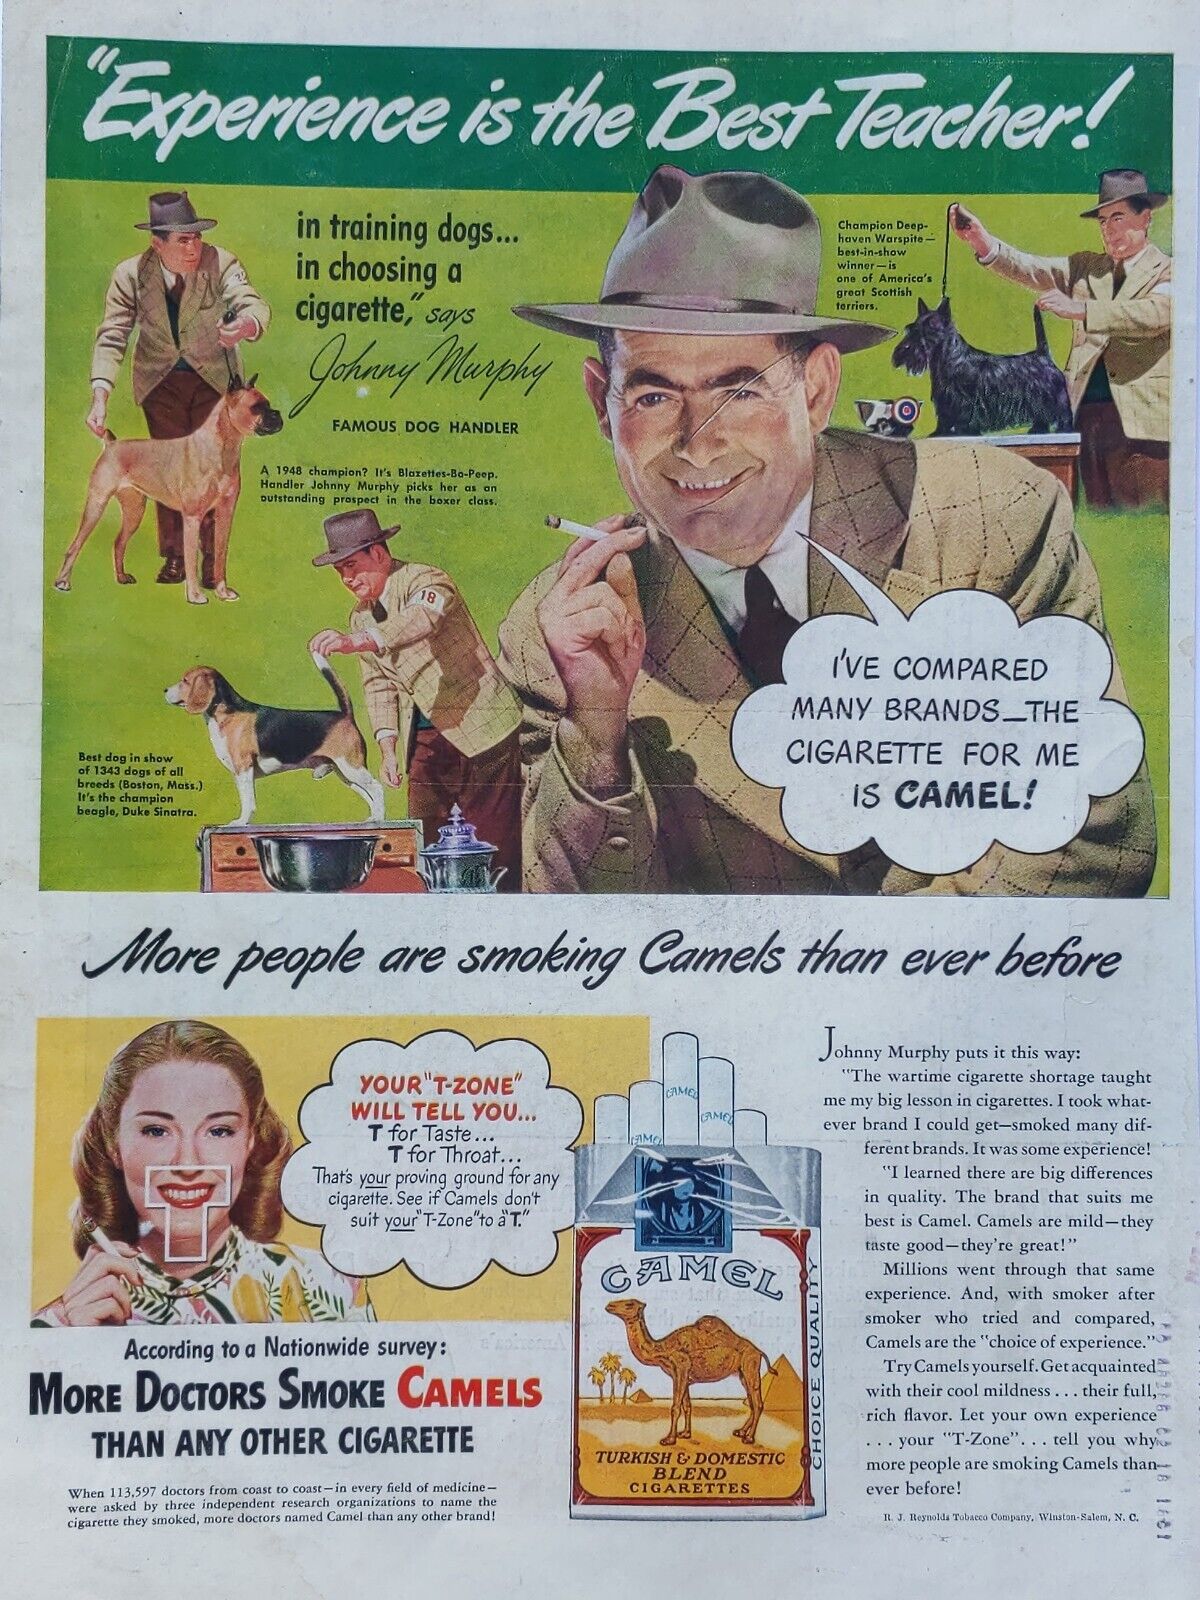  1947 vintage camel cigarettes print ad. Featuring Johnny Murphy